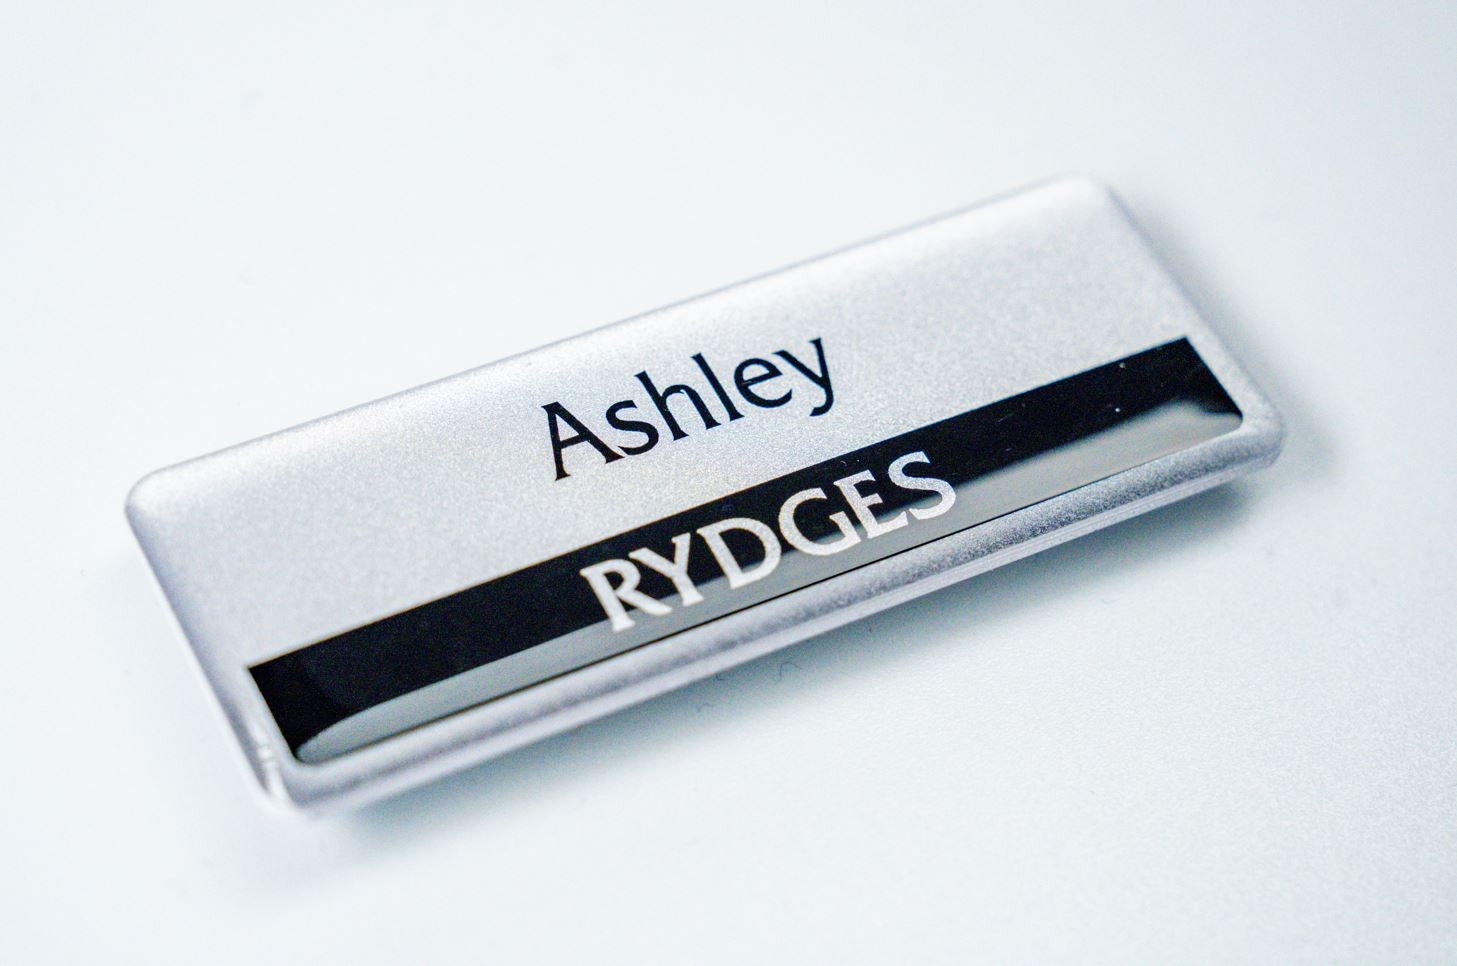 Matte silver Acrylic name badge with resin coating